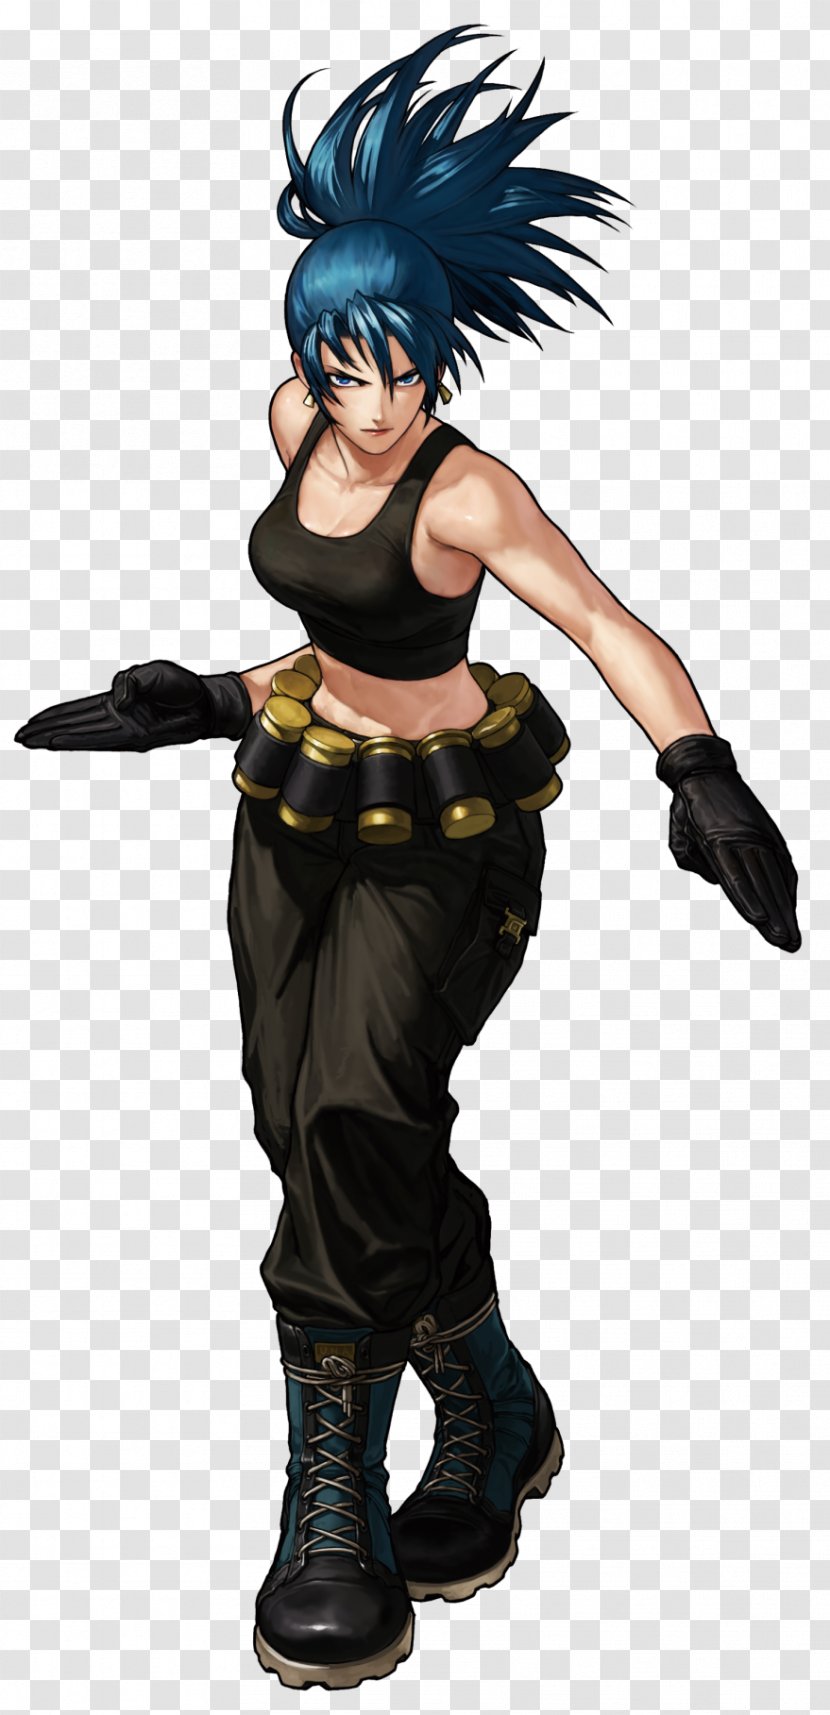 The King Of Fighters XIII '96 Fighters: Maximum Impact Ikari Warriors - Flower - Art Character Design Transparent PNG